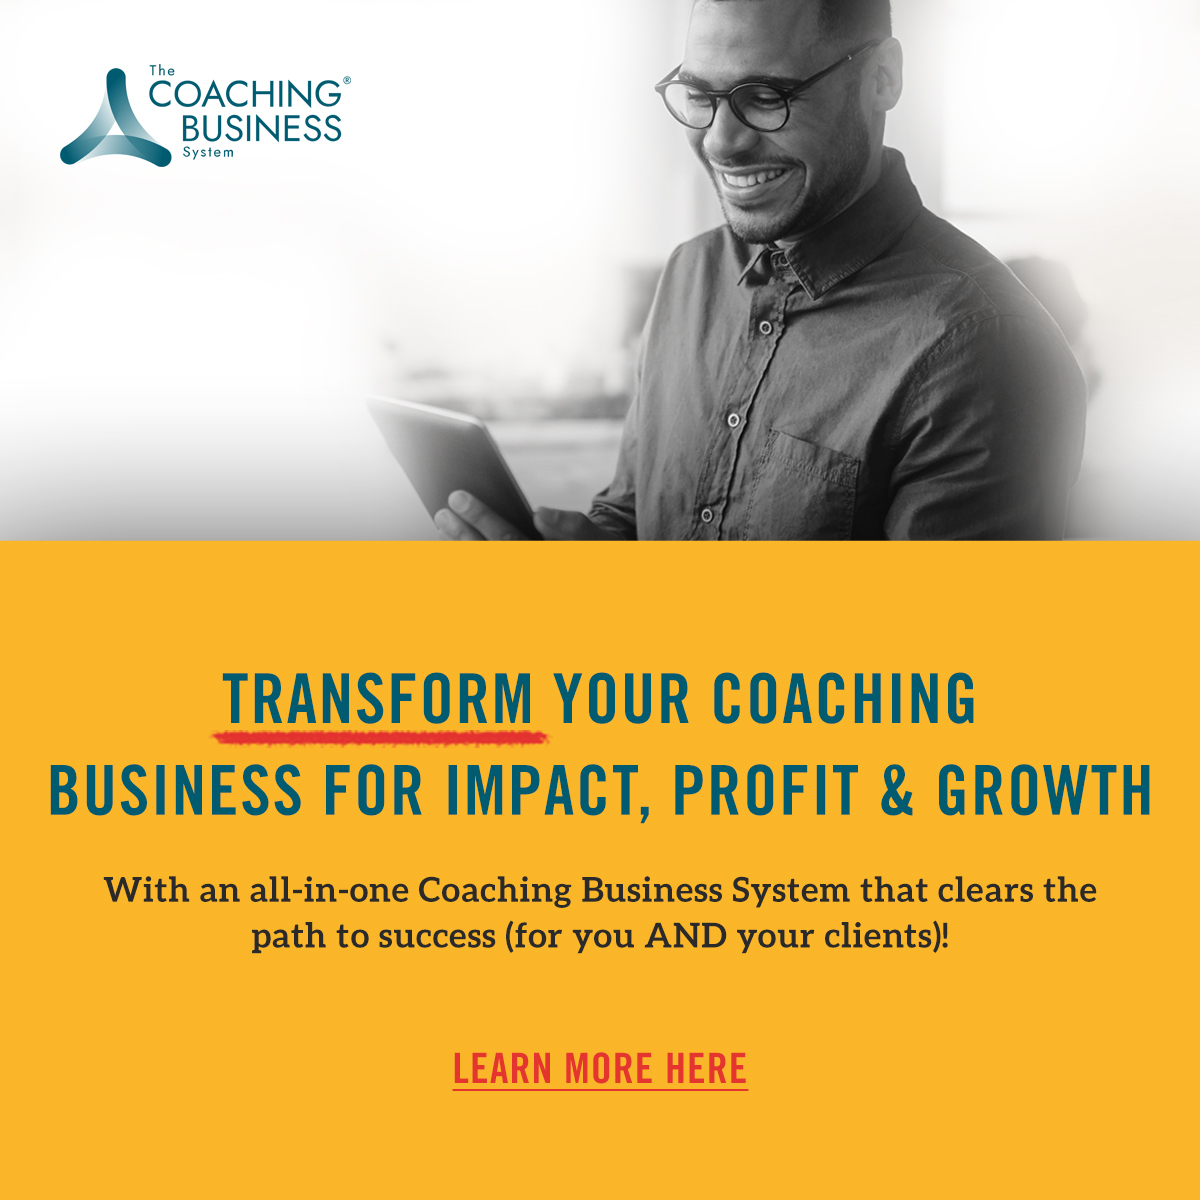 The Coaching Business System